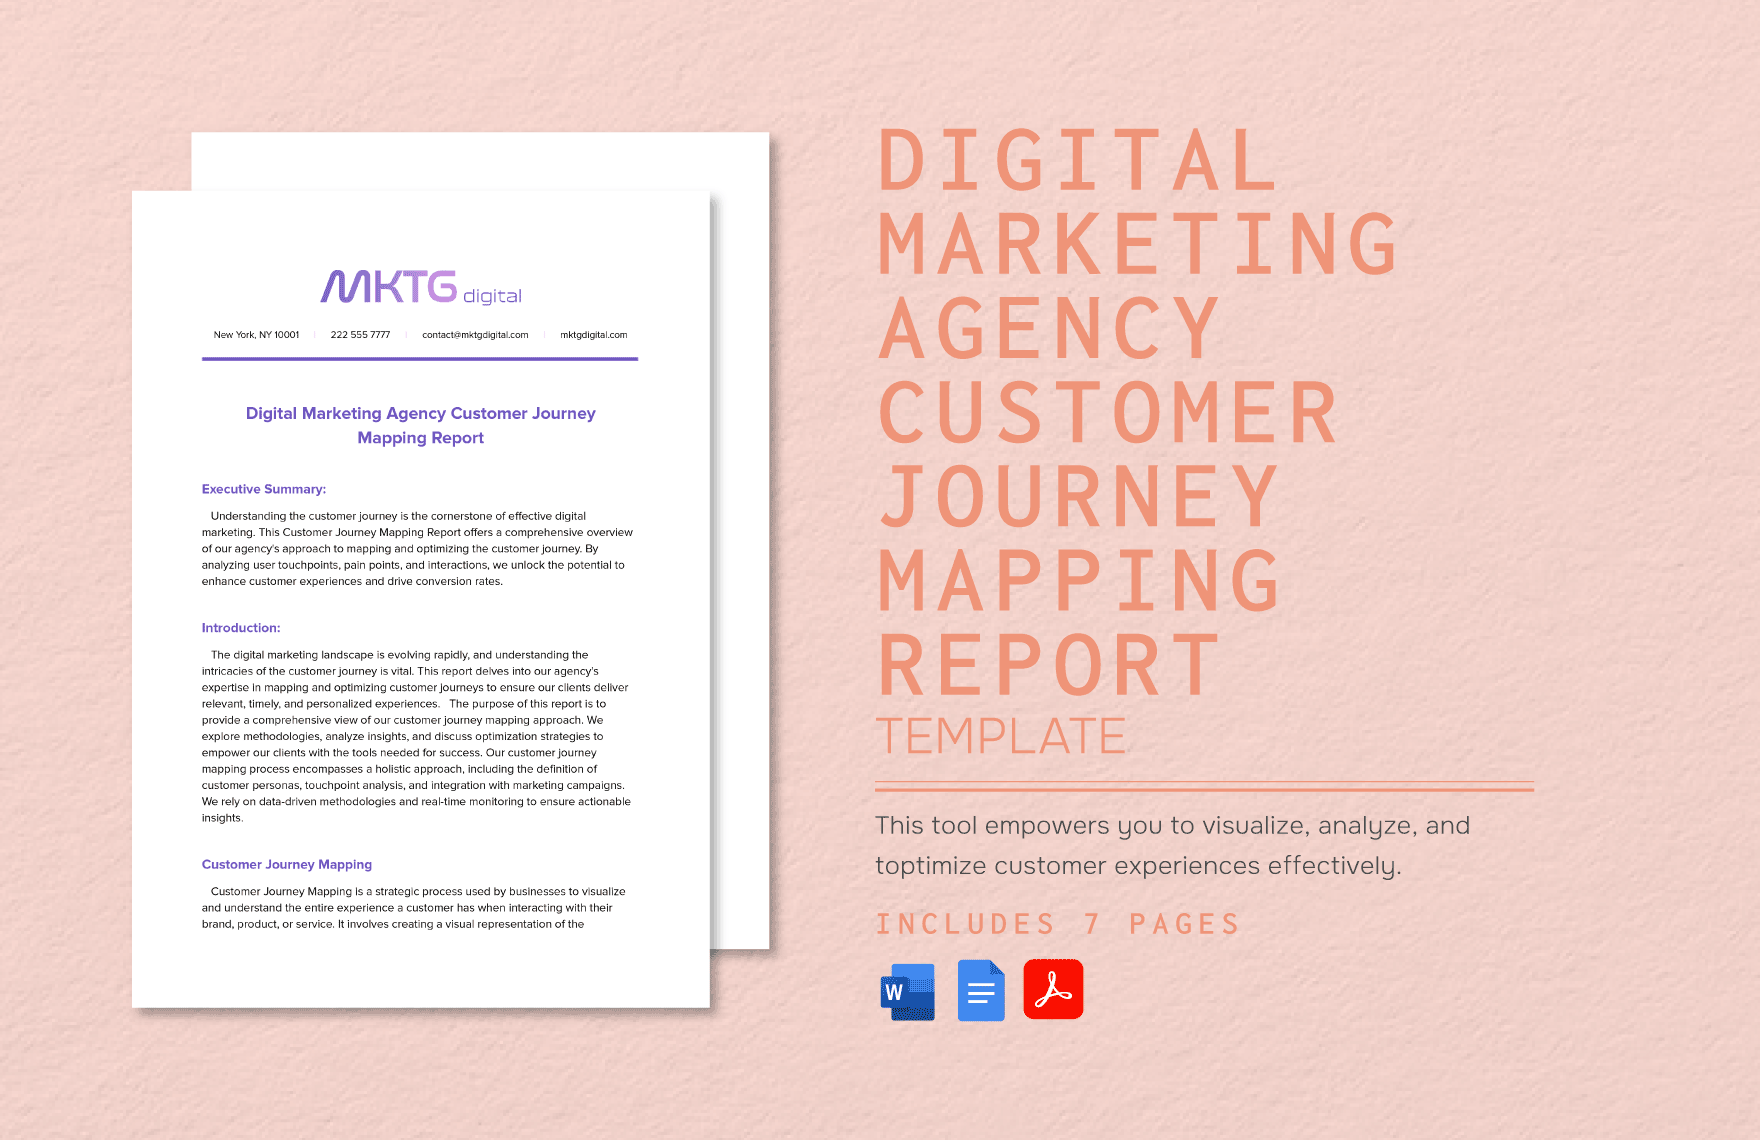 Digital Marketing Agency Customer Journey Mapping Report Template in Word, Google Docs, PDF